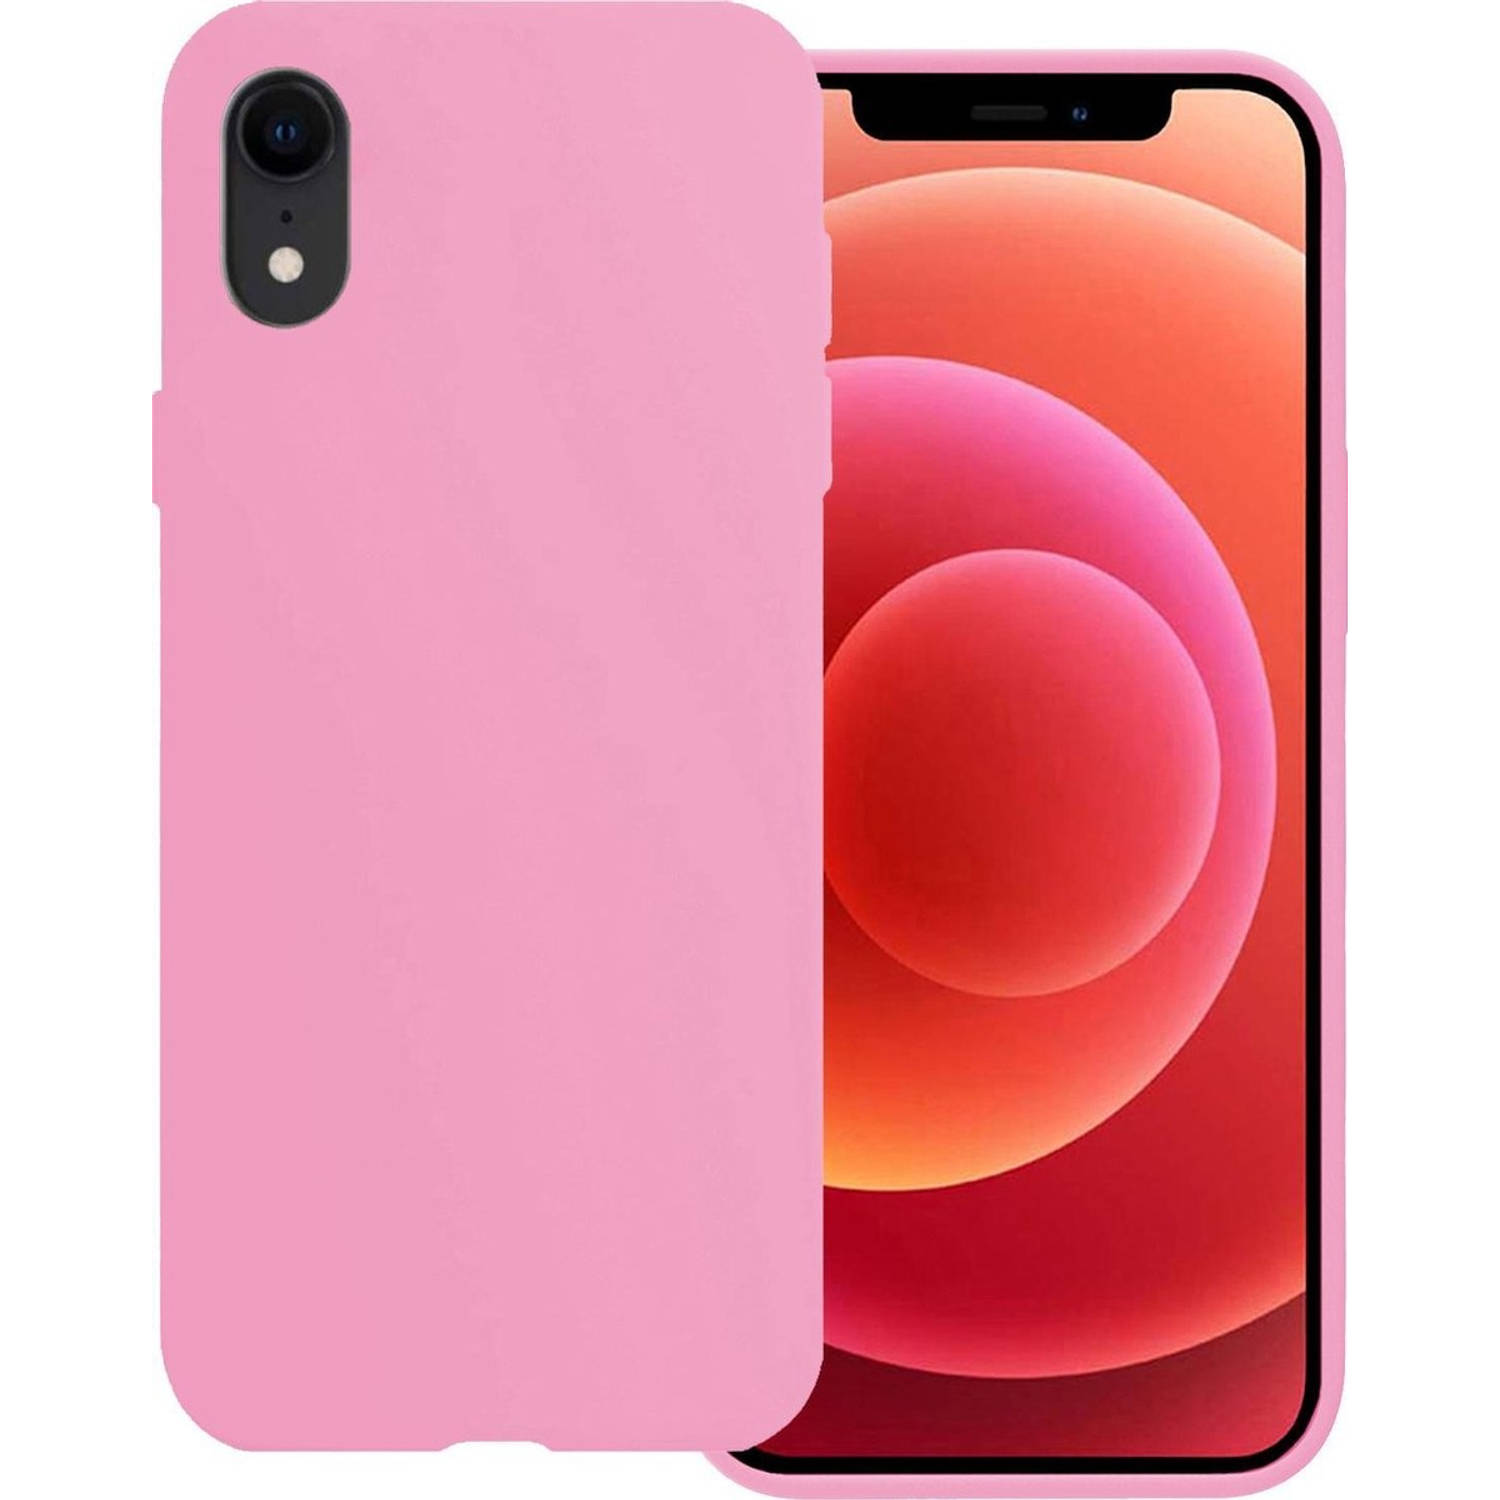 Basey Apple Iphone Xr Hoesje Siliconen Hoes Case Cover Apple Iphone Xr-lichtroze